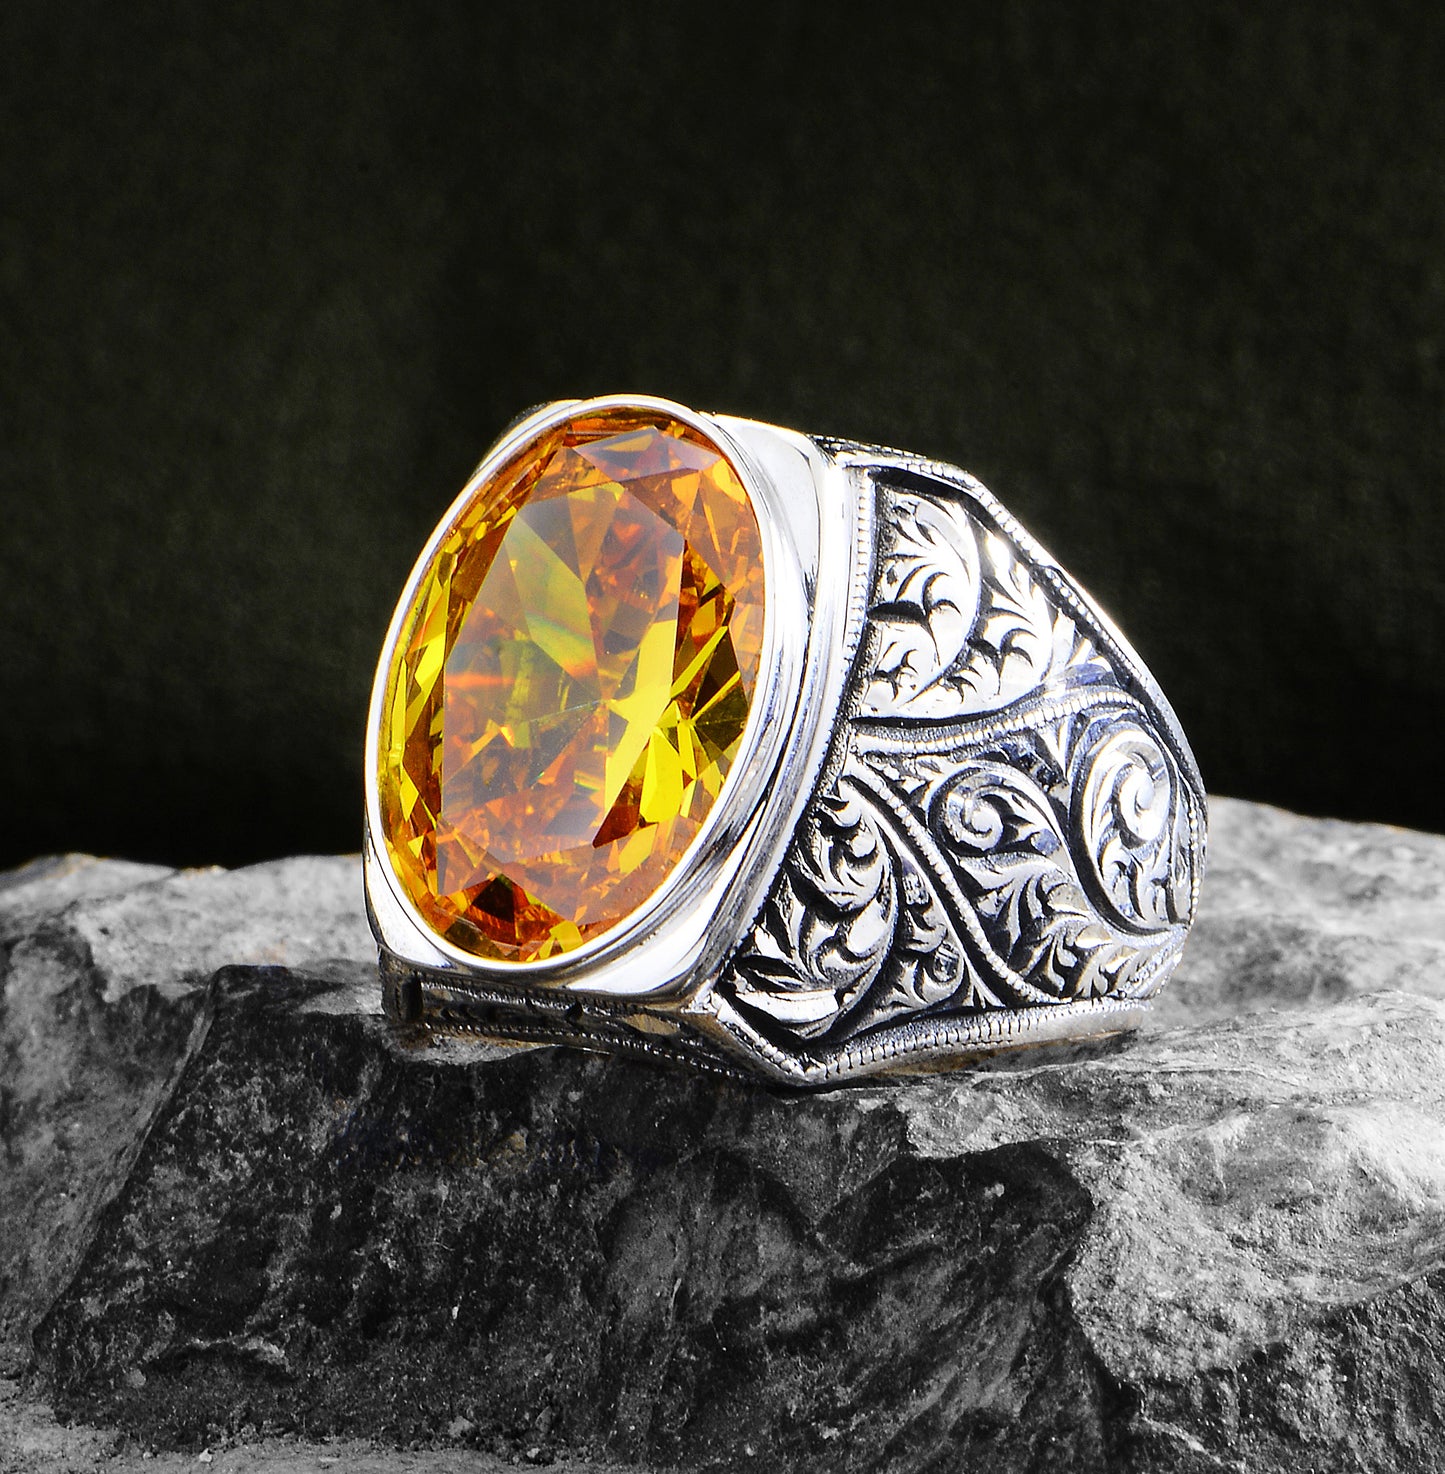 Silver Hand Engraved Yellow Citrine Stone Ring